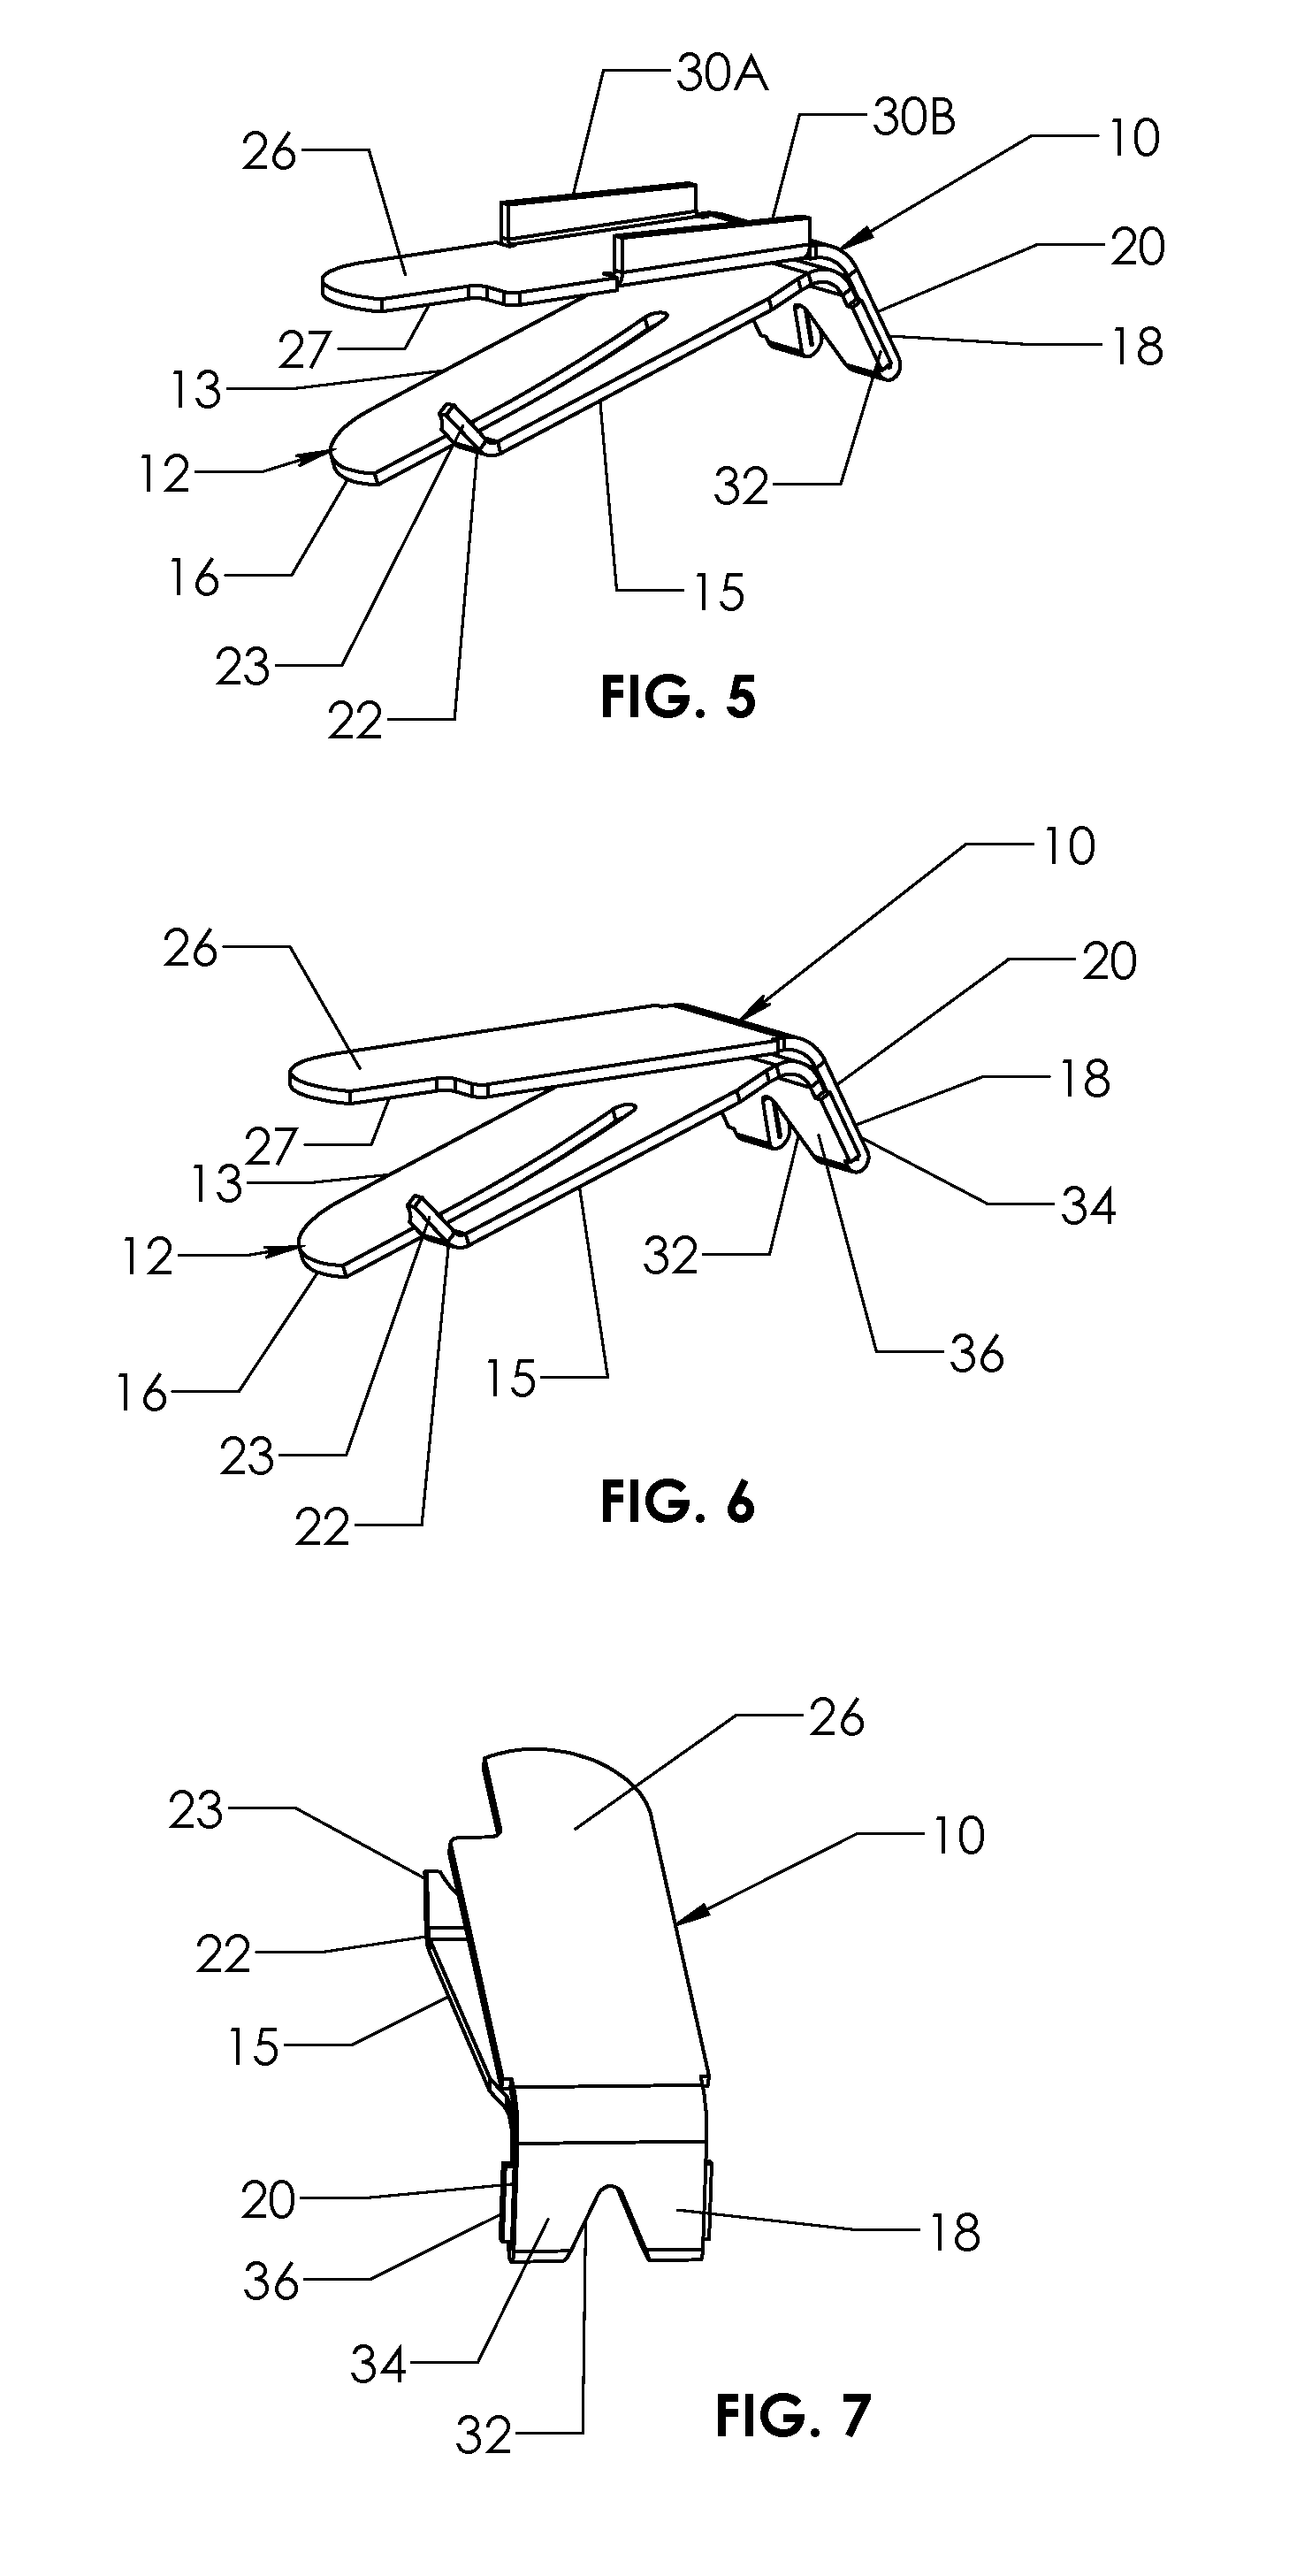 Low profile magazine follower with isolated slide lock lever